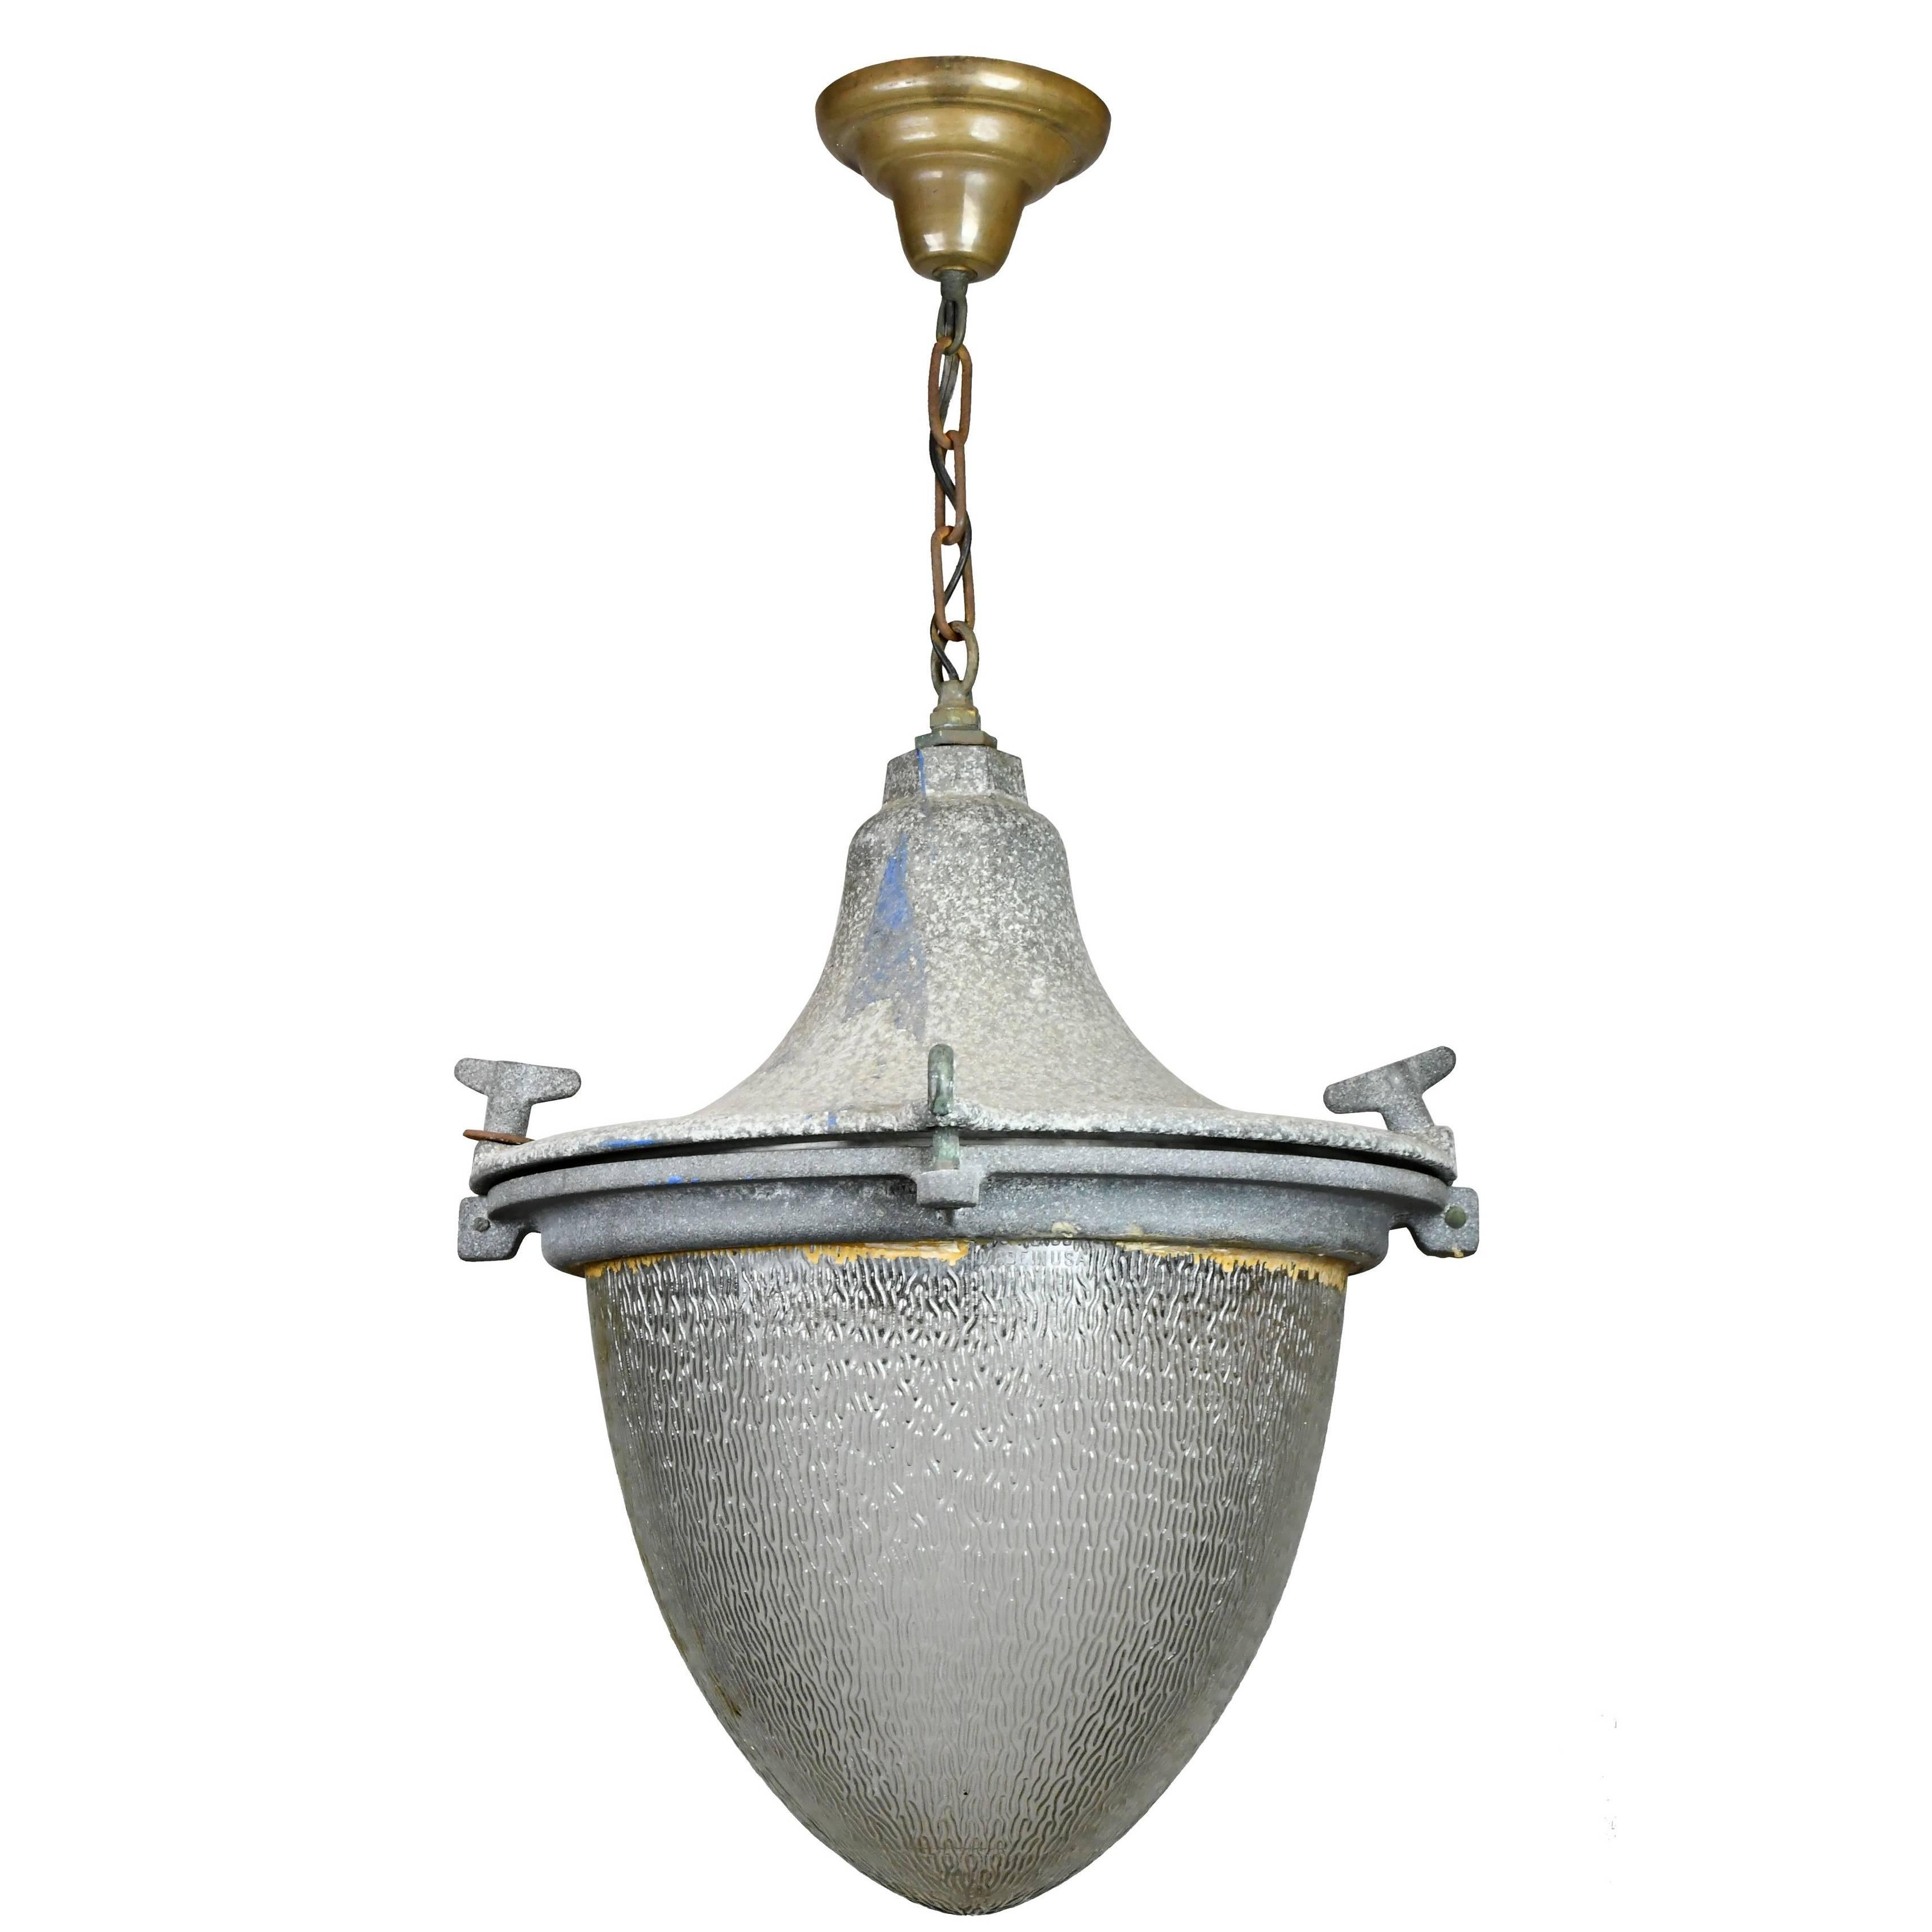 General Electric Exterior Aluminum Pendant with Textured Glass